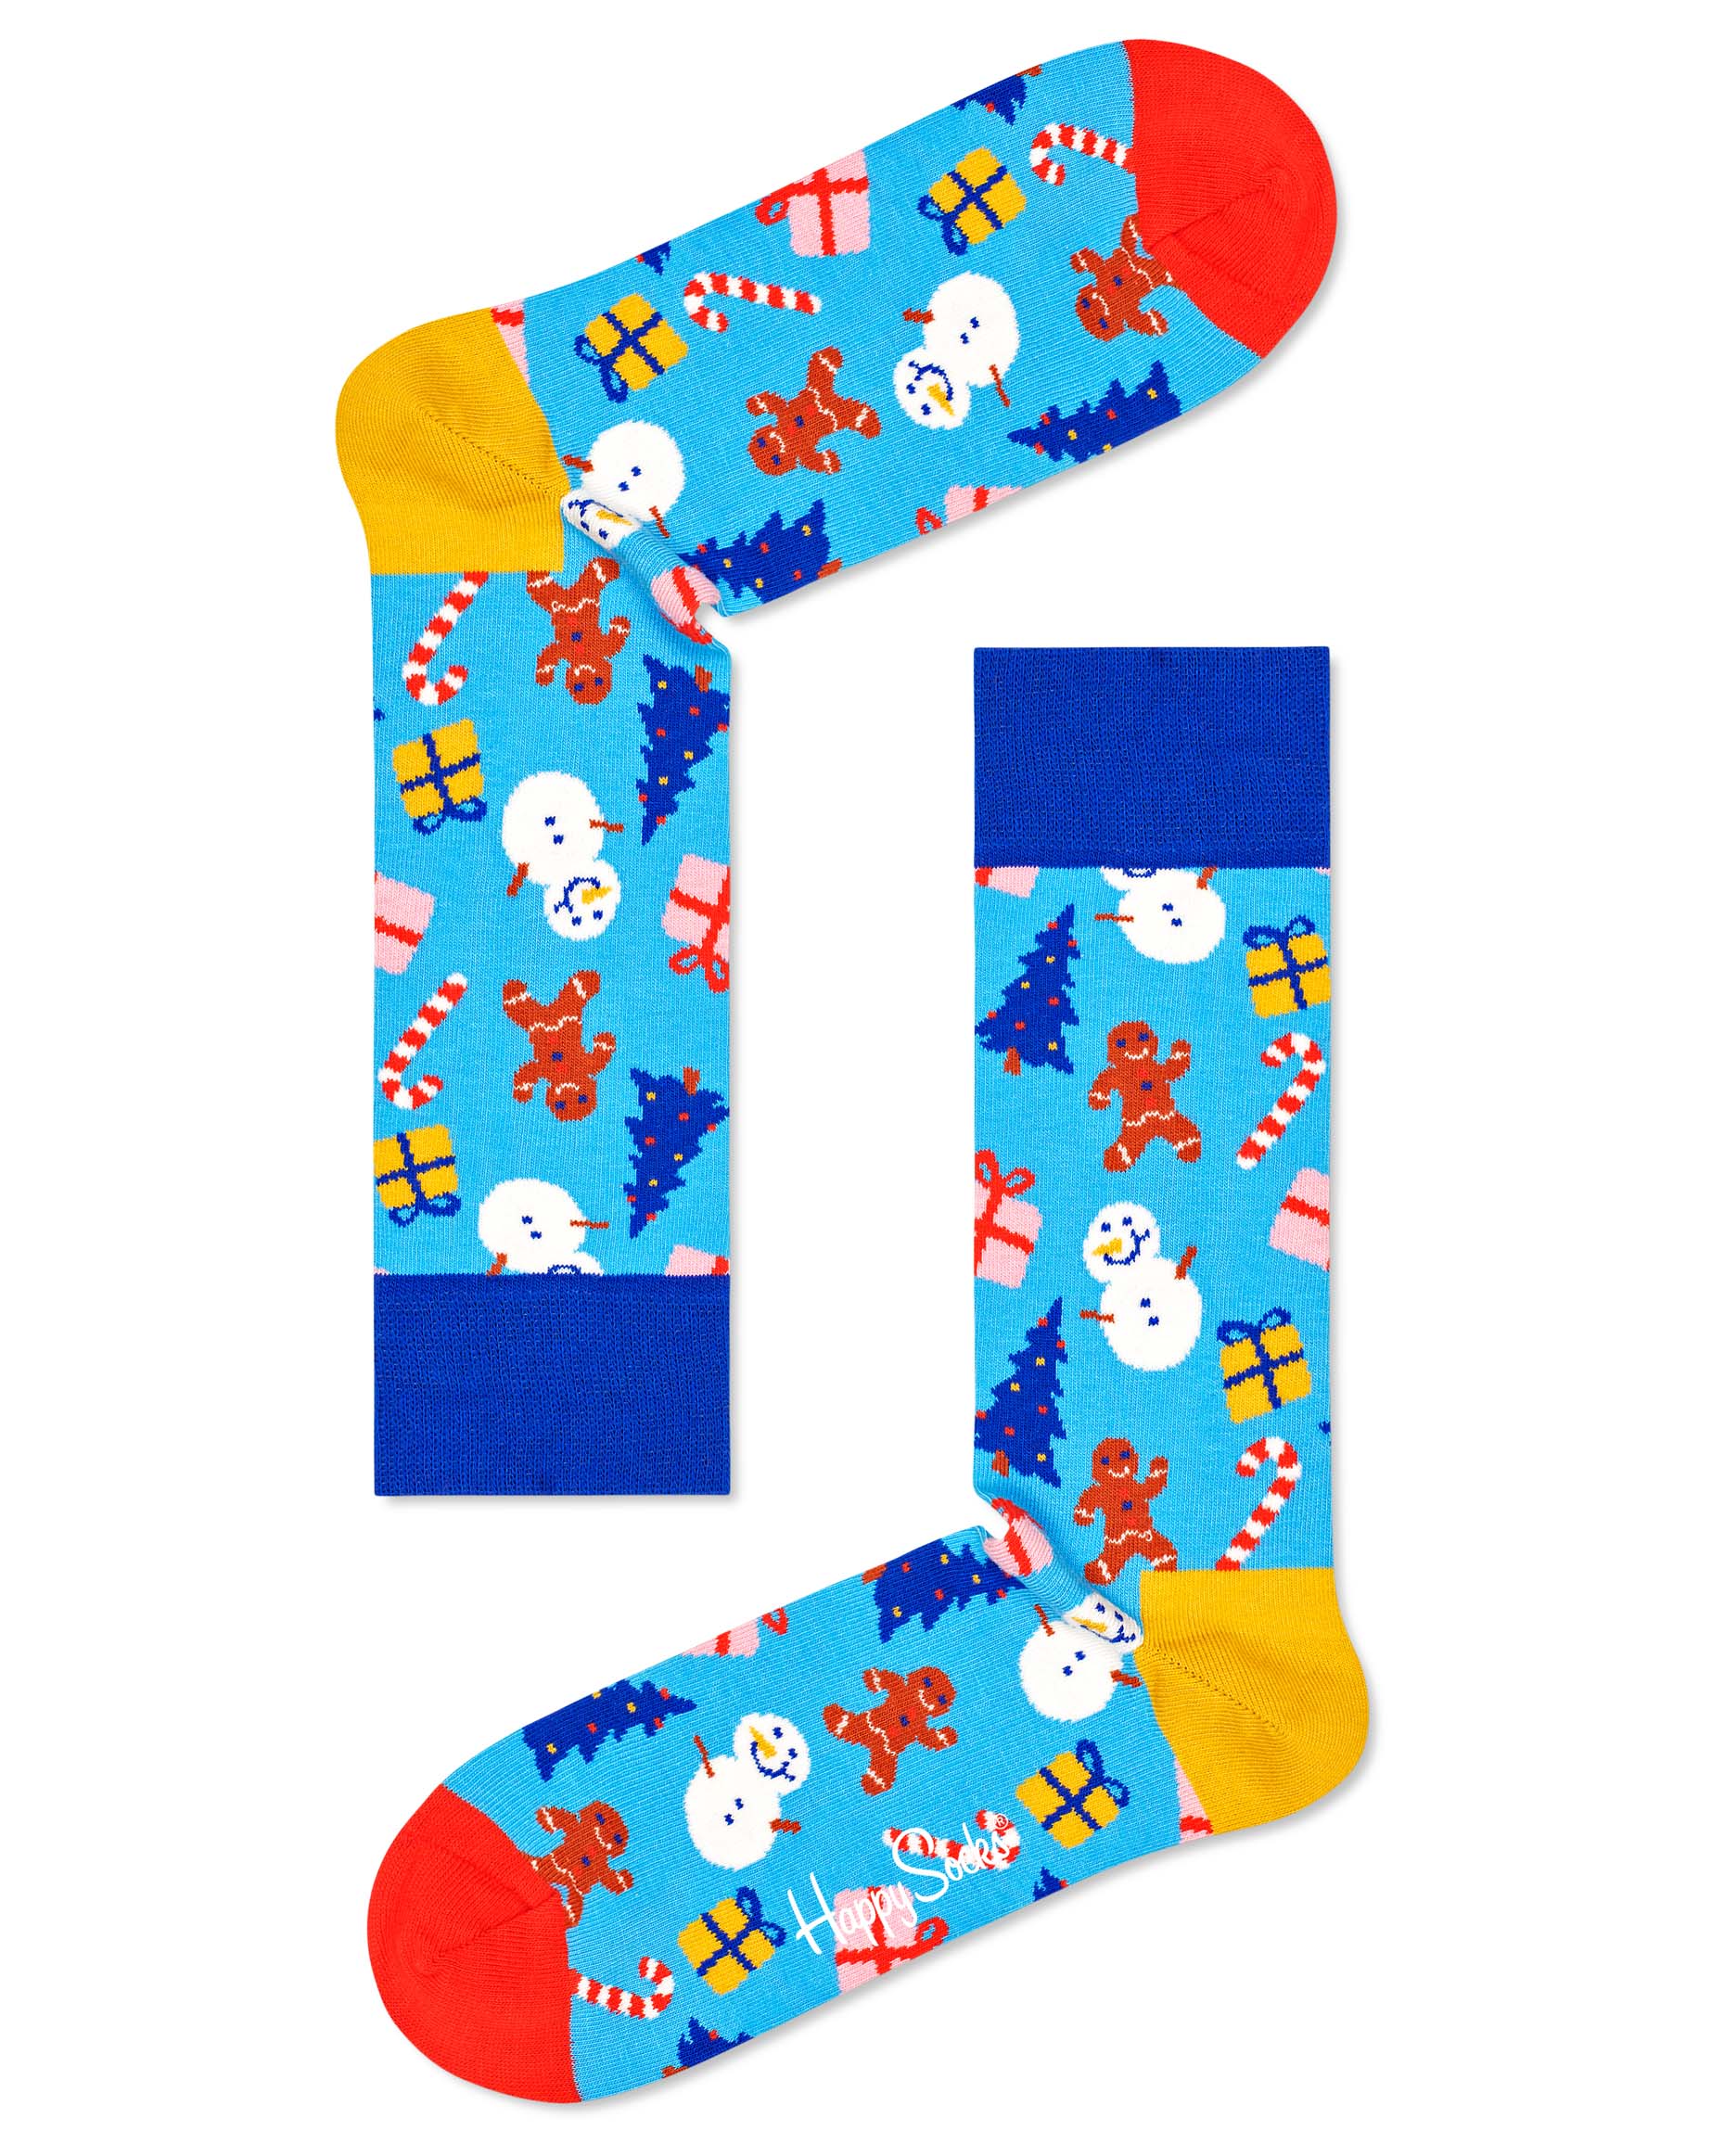 Happy Socks XDTG08-0200 Decoration Time Gift Set - Light blue Xmas novelty socks with snowmen, gingerbread men, presents, candy canes and Xmas trees in shades of blue, red, mustard and brown.